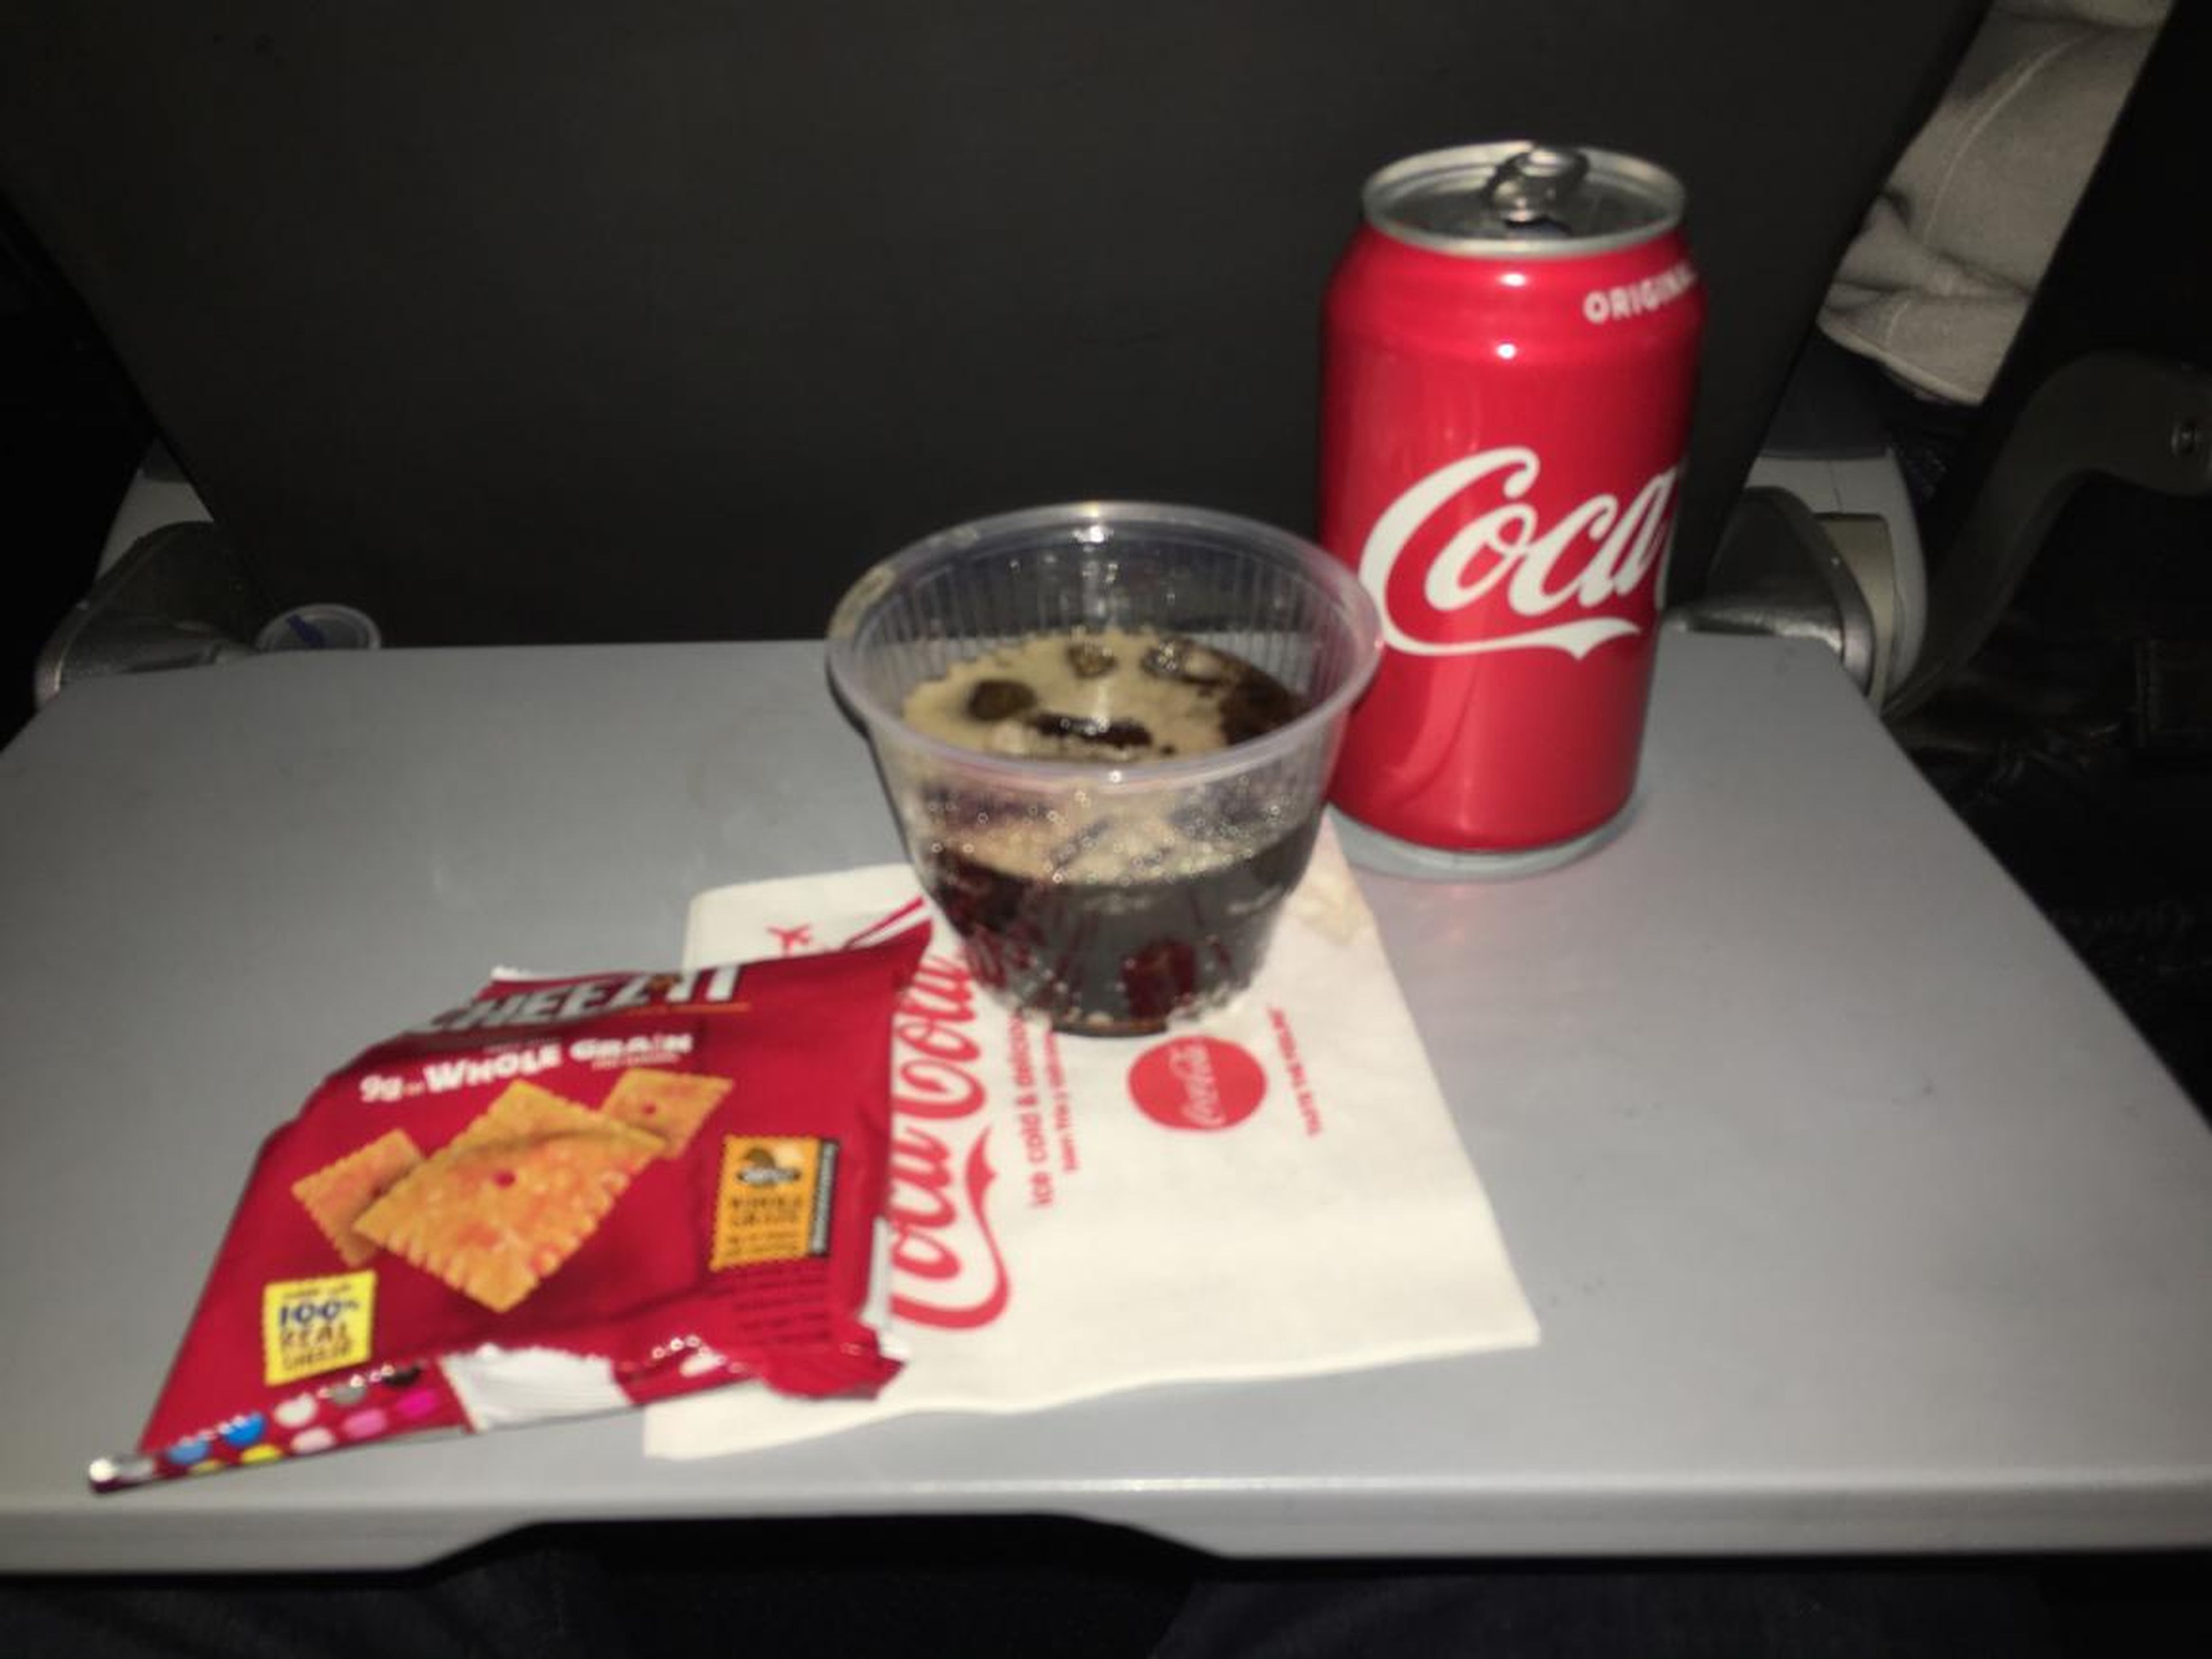 For the most part, in-flight dining in economy class means a soda and a snack.